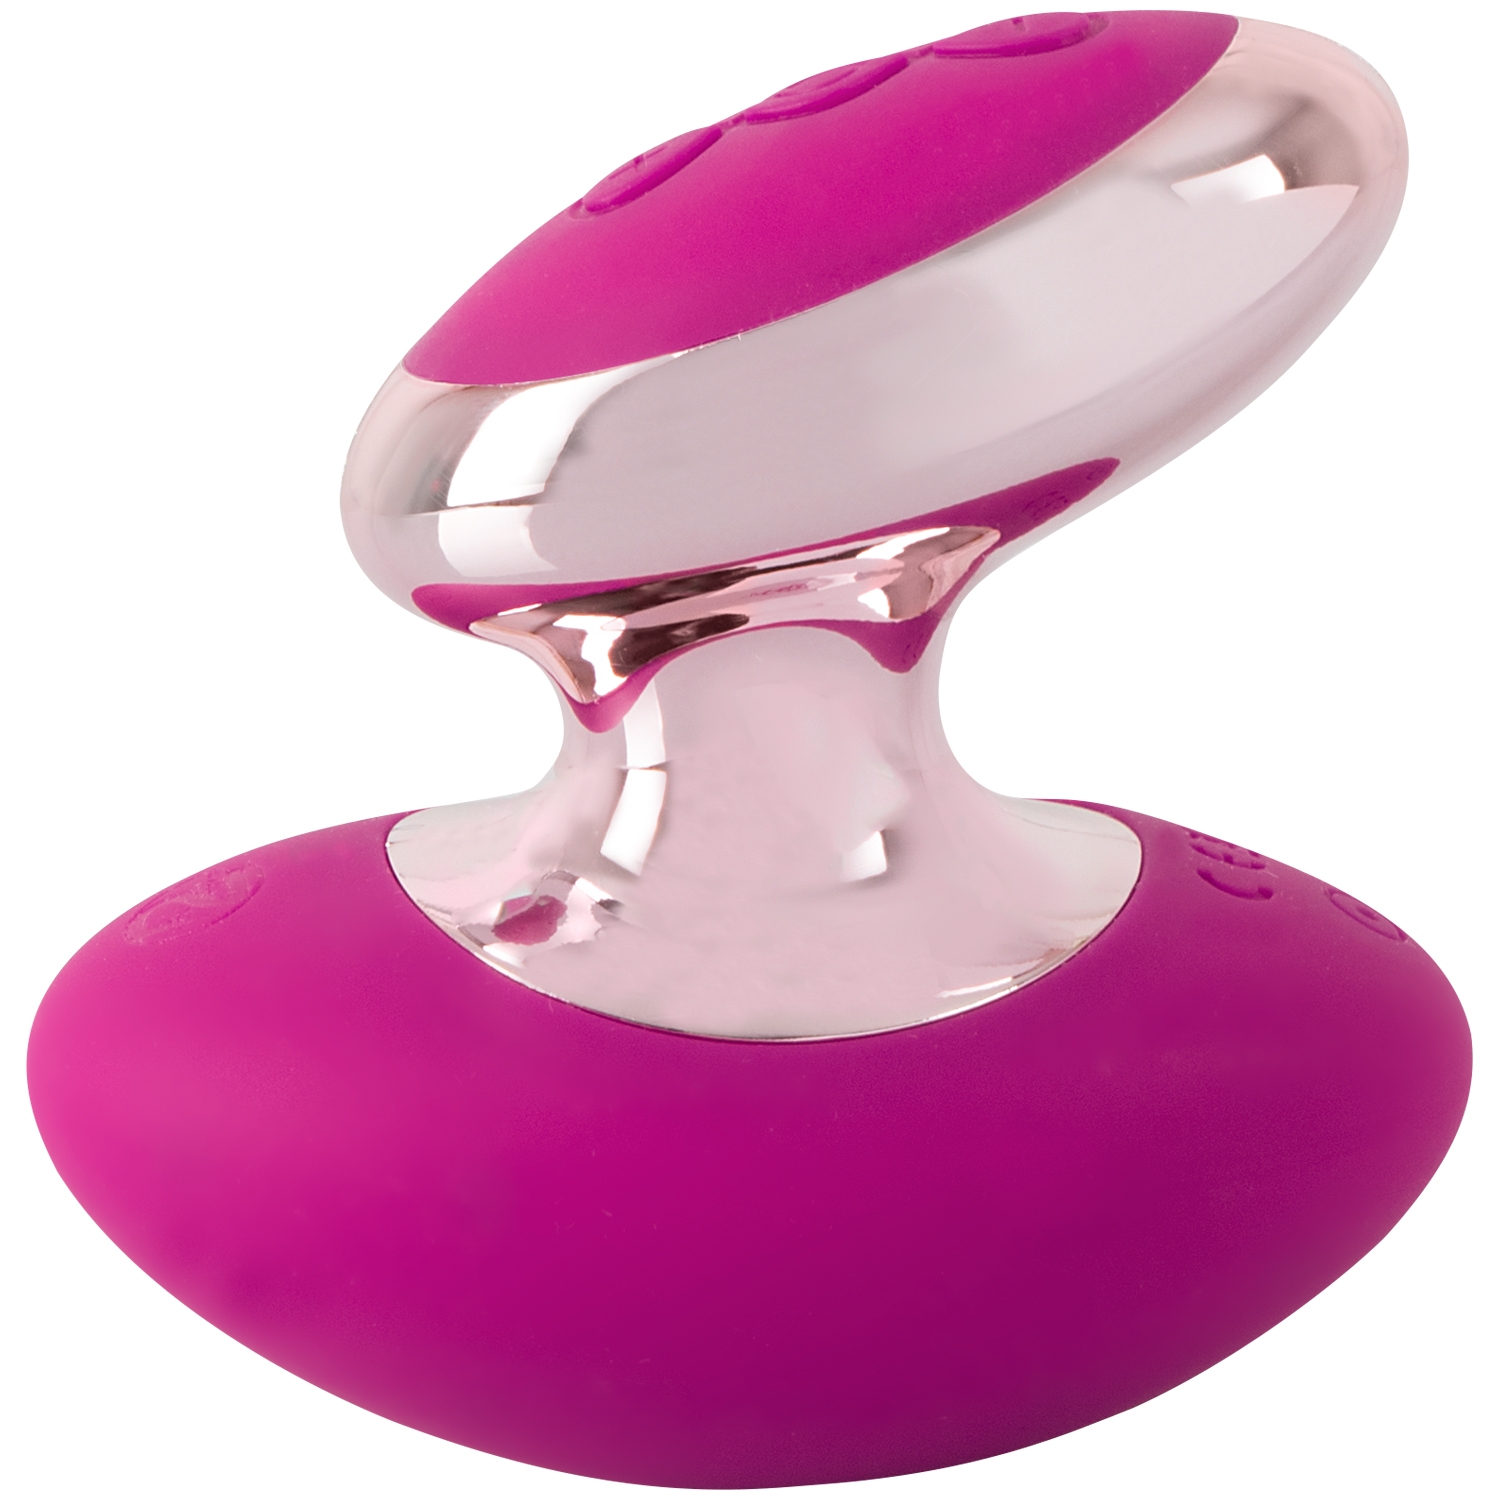 You2Toys Couples Choice Massager - Rose